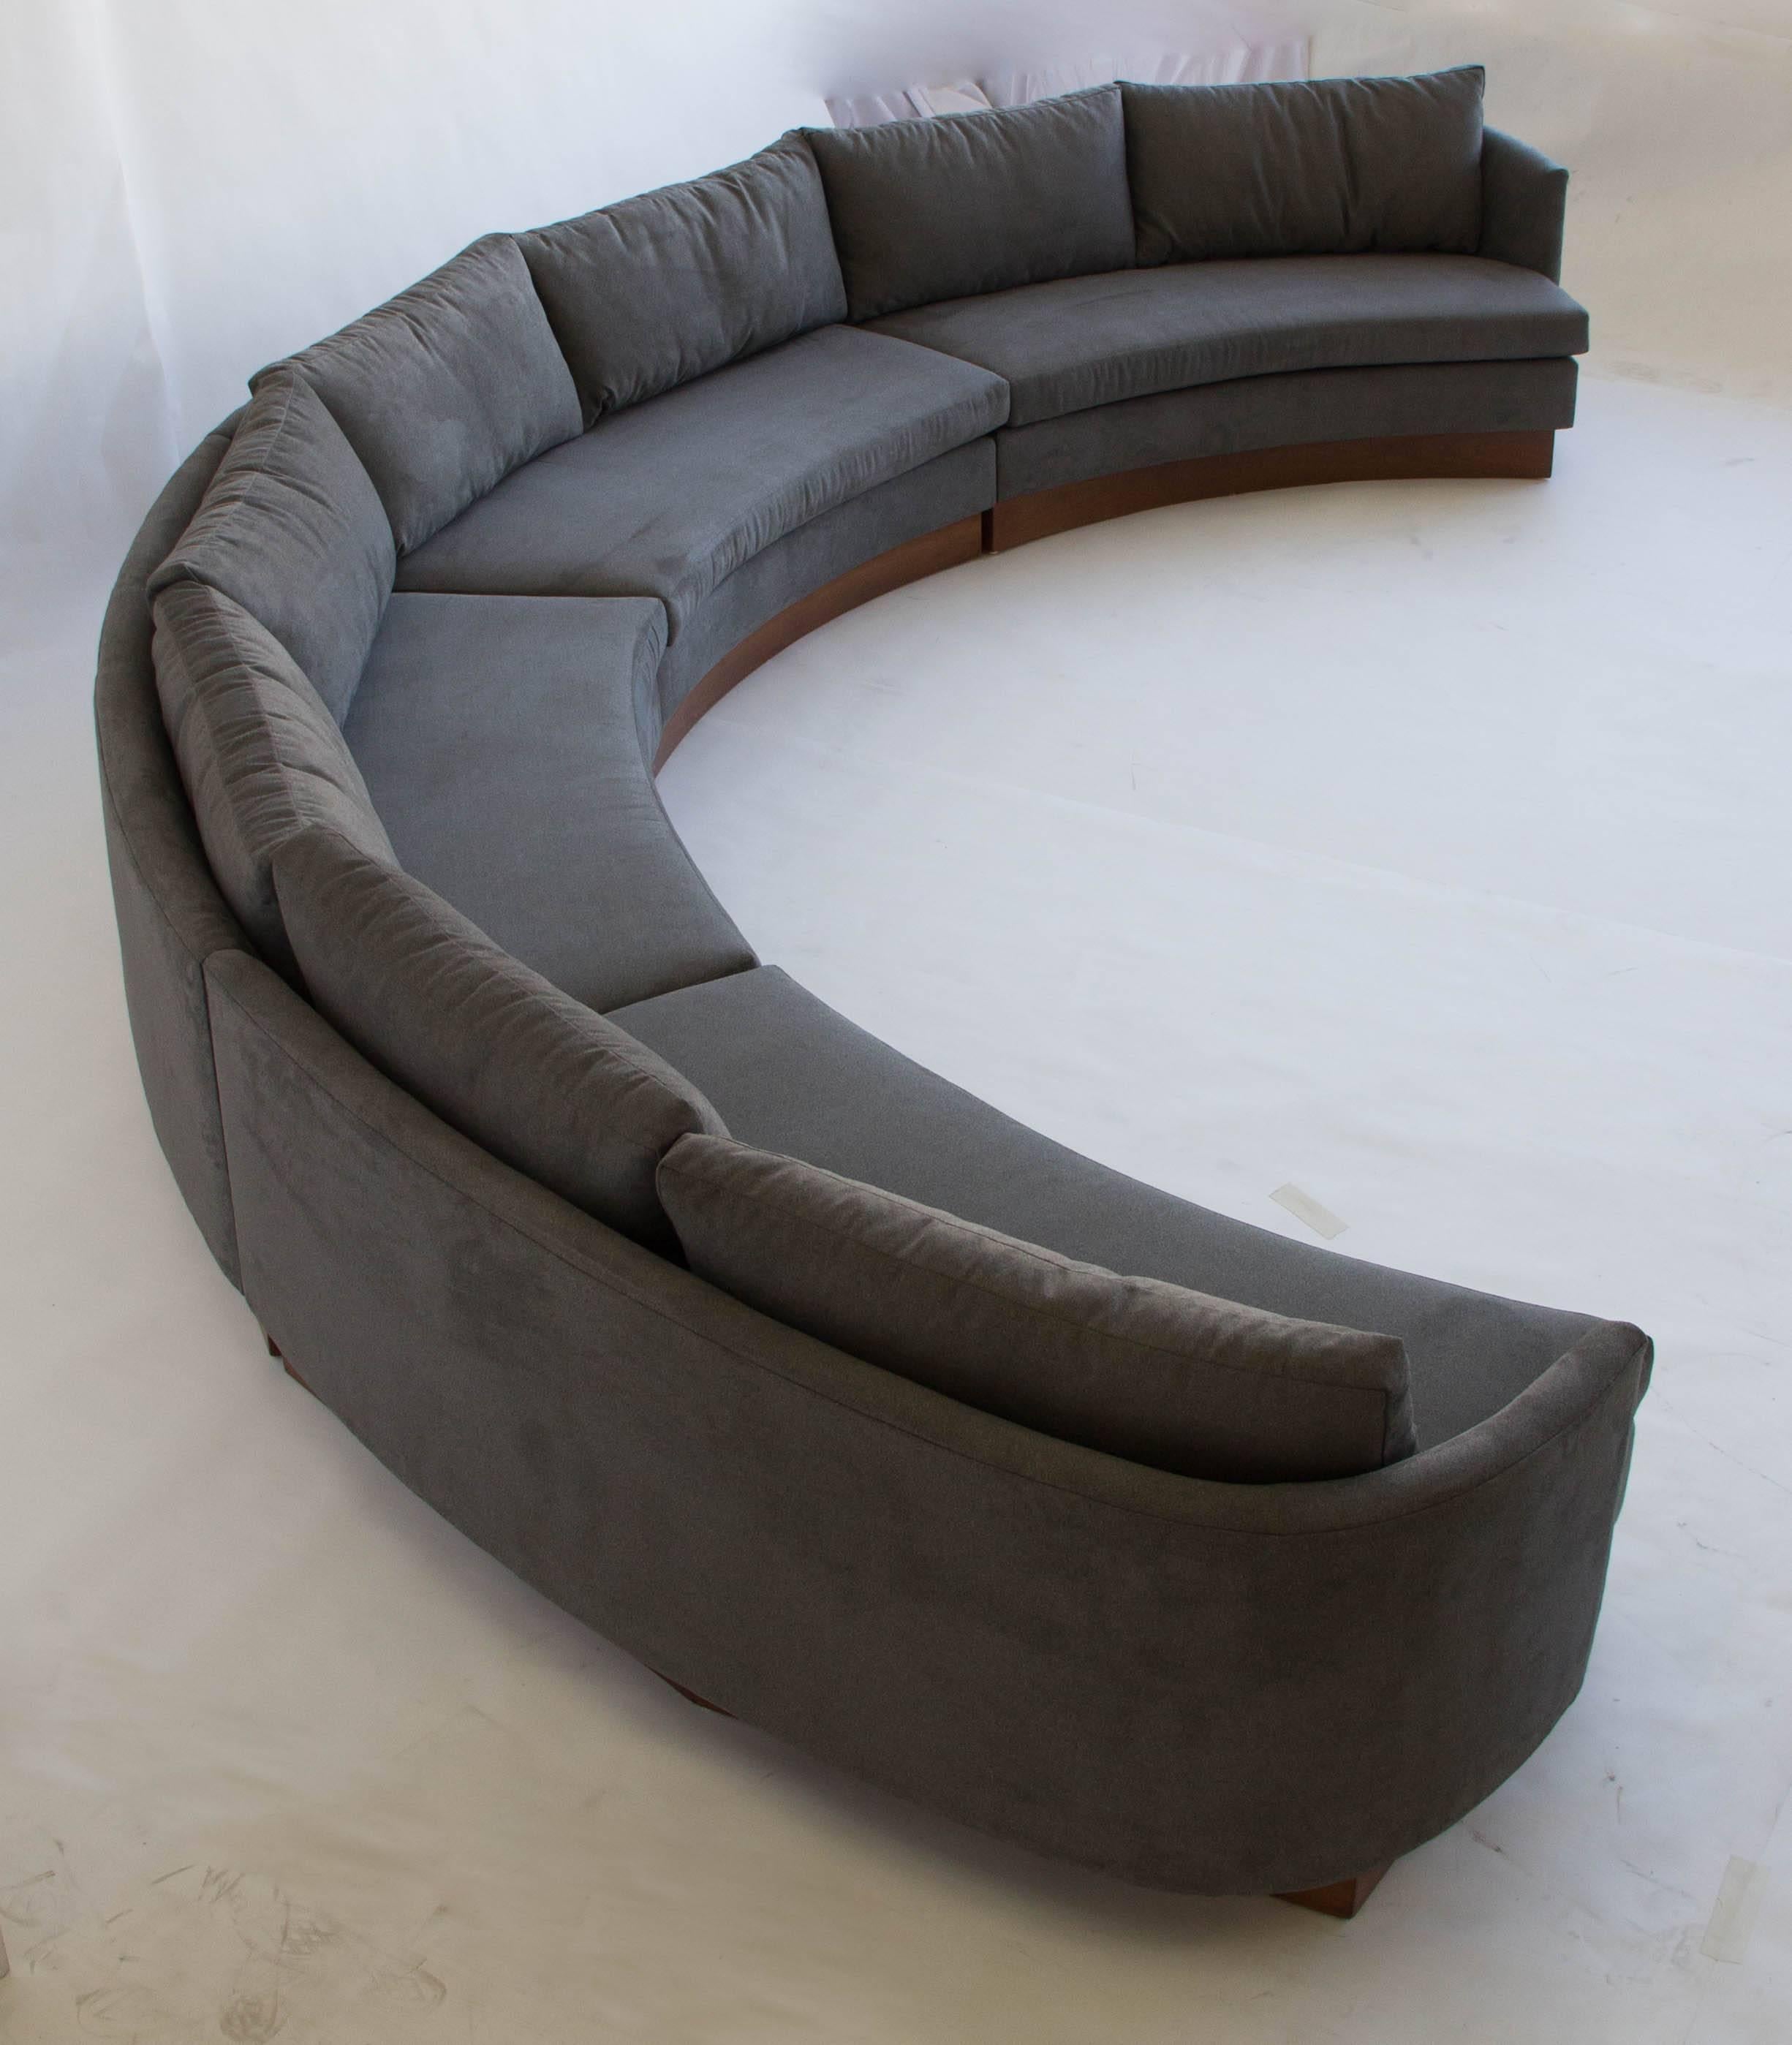 This large semi-circular sofa was made by Carson's of Highpoint North Carolina in the 1970s. Milo Baughman once designed for Carson's but there is no documentation of this piece stating that it is in fact Milo Baughman. 
Each of the four sections